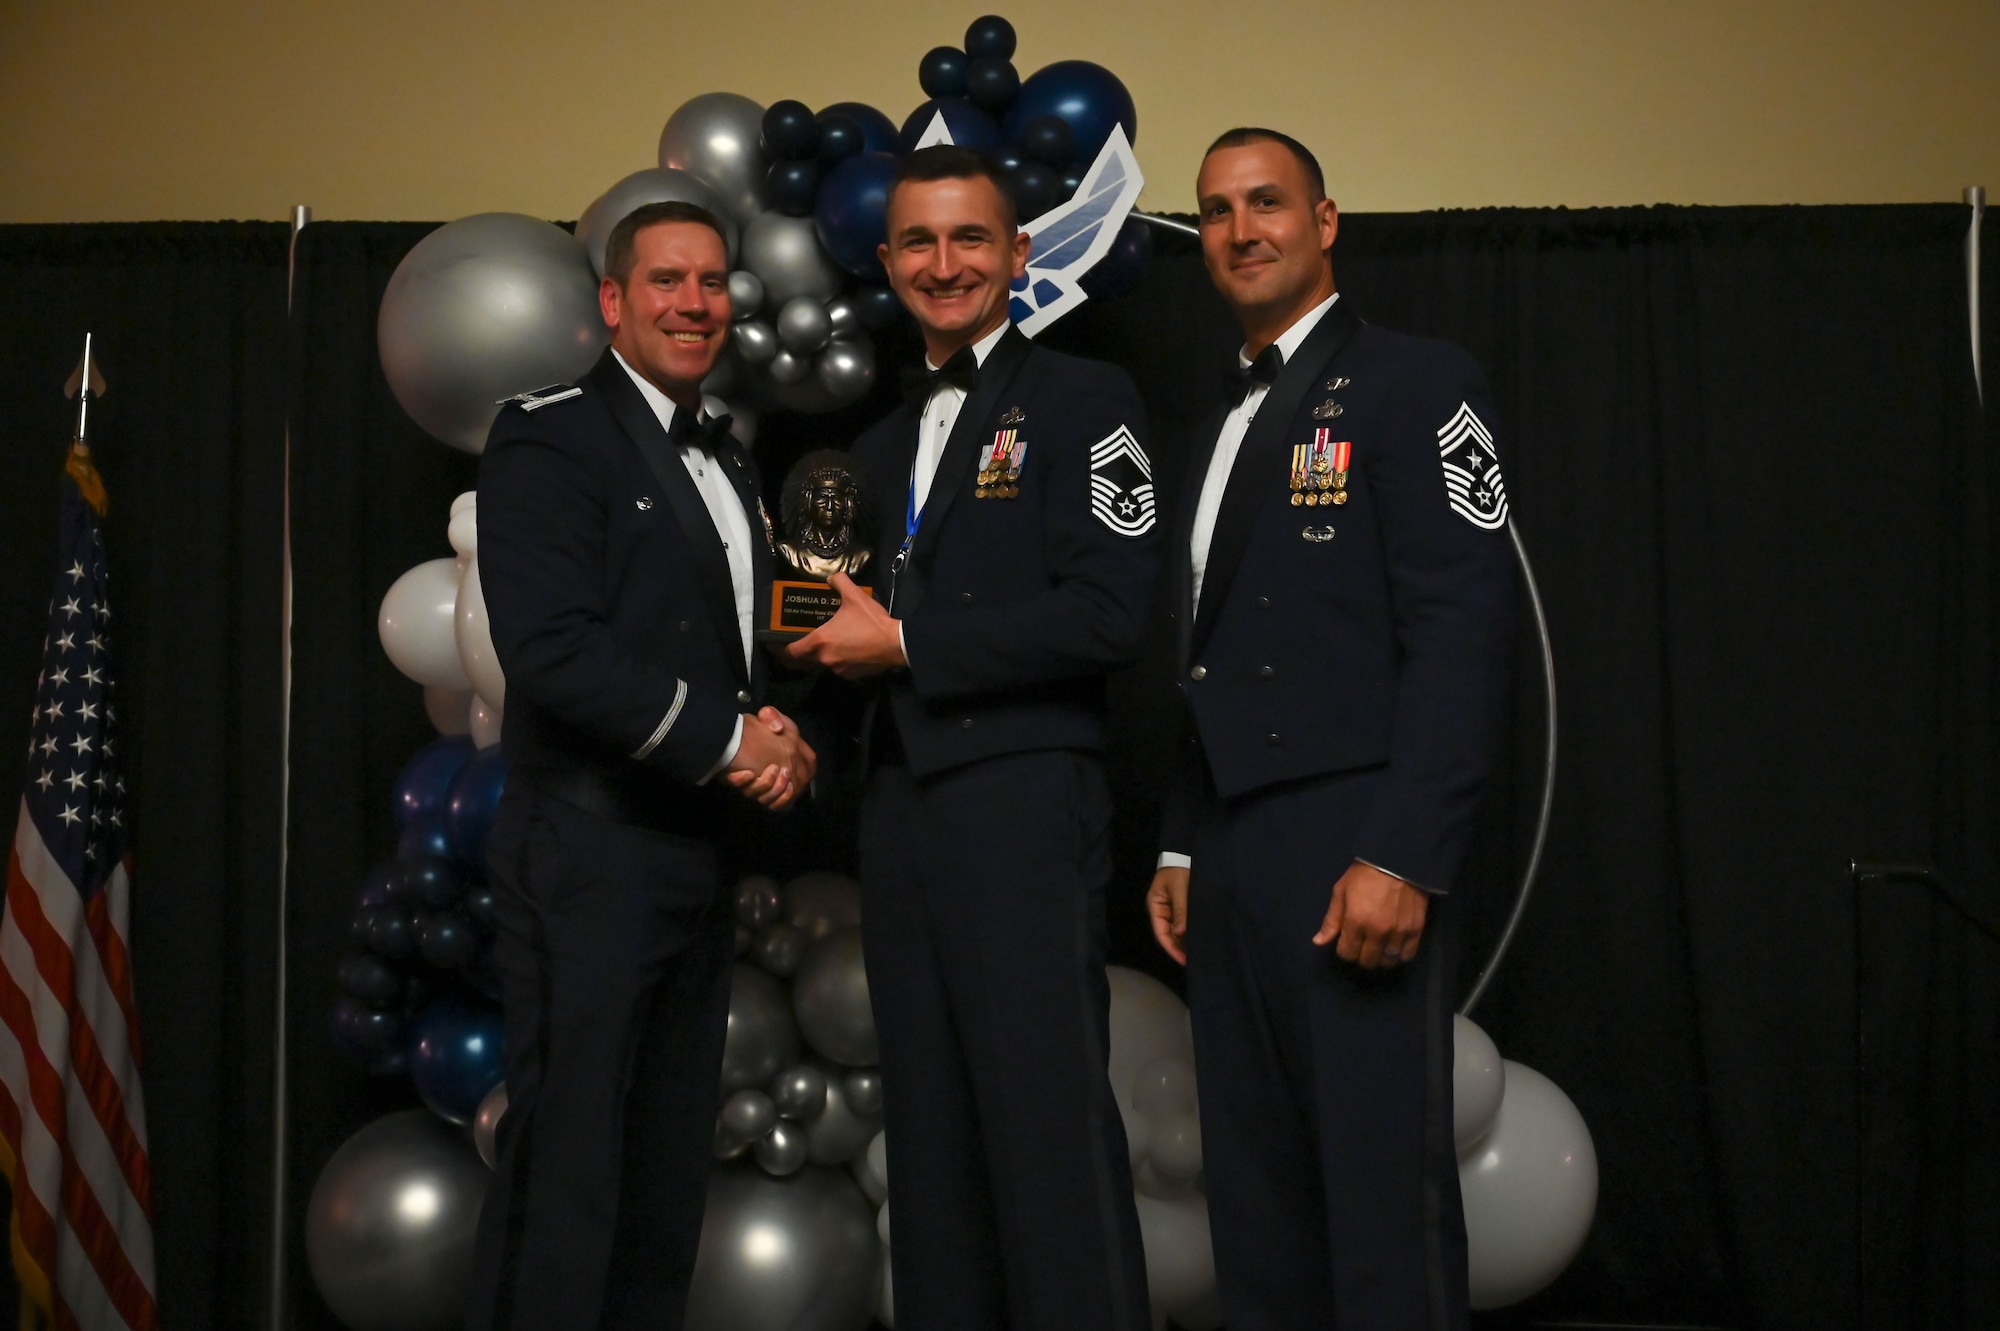 Chief Master Sgt. Joshua Ziriak (center), 388th Logistics Support Squadron, poses with Col. Craig Andrle (left), 388th Fighter Wing commander, and Chief Master Sgt. Brandon Wolfgang, 388th FW command chief.